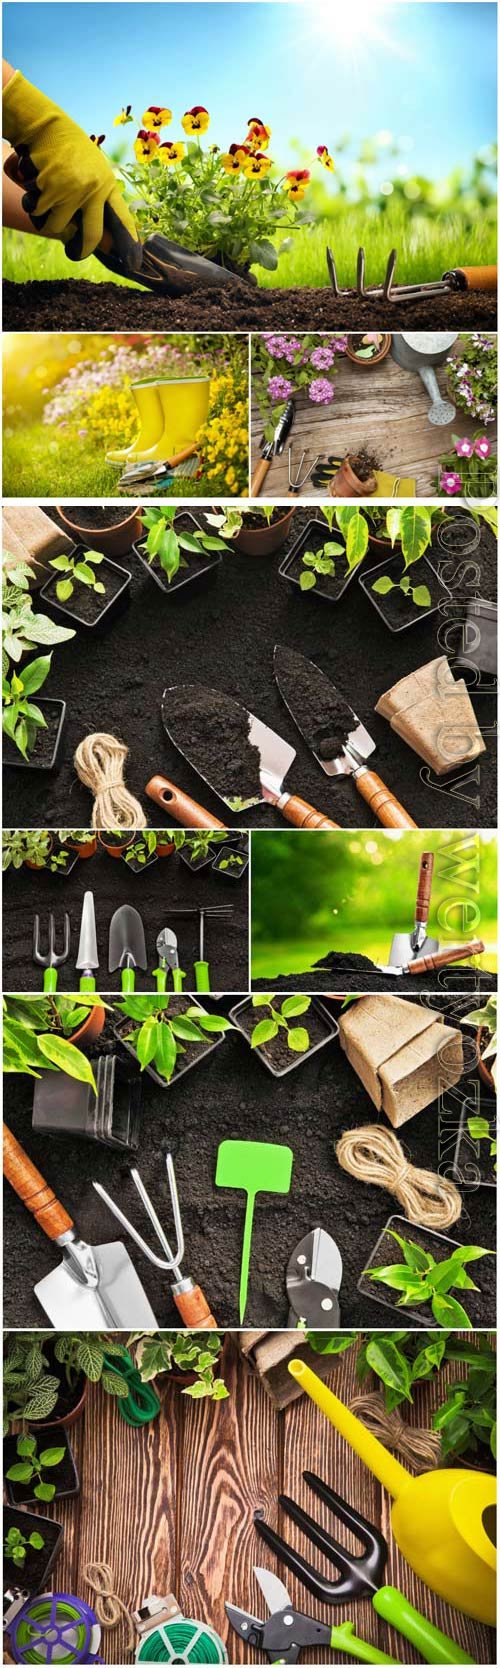 Gardening, tools to care for flowers and trees stock photo